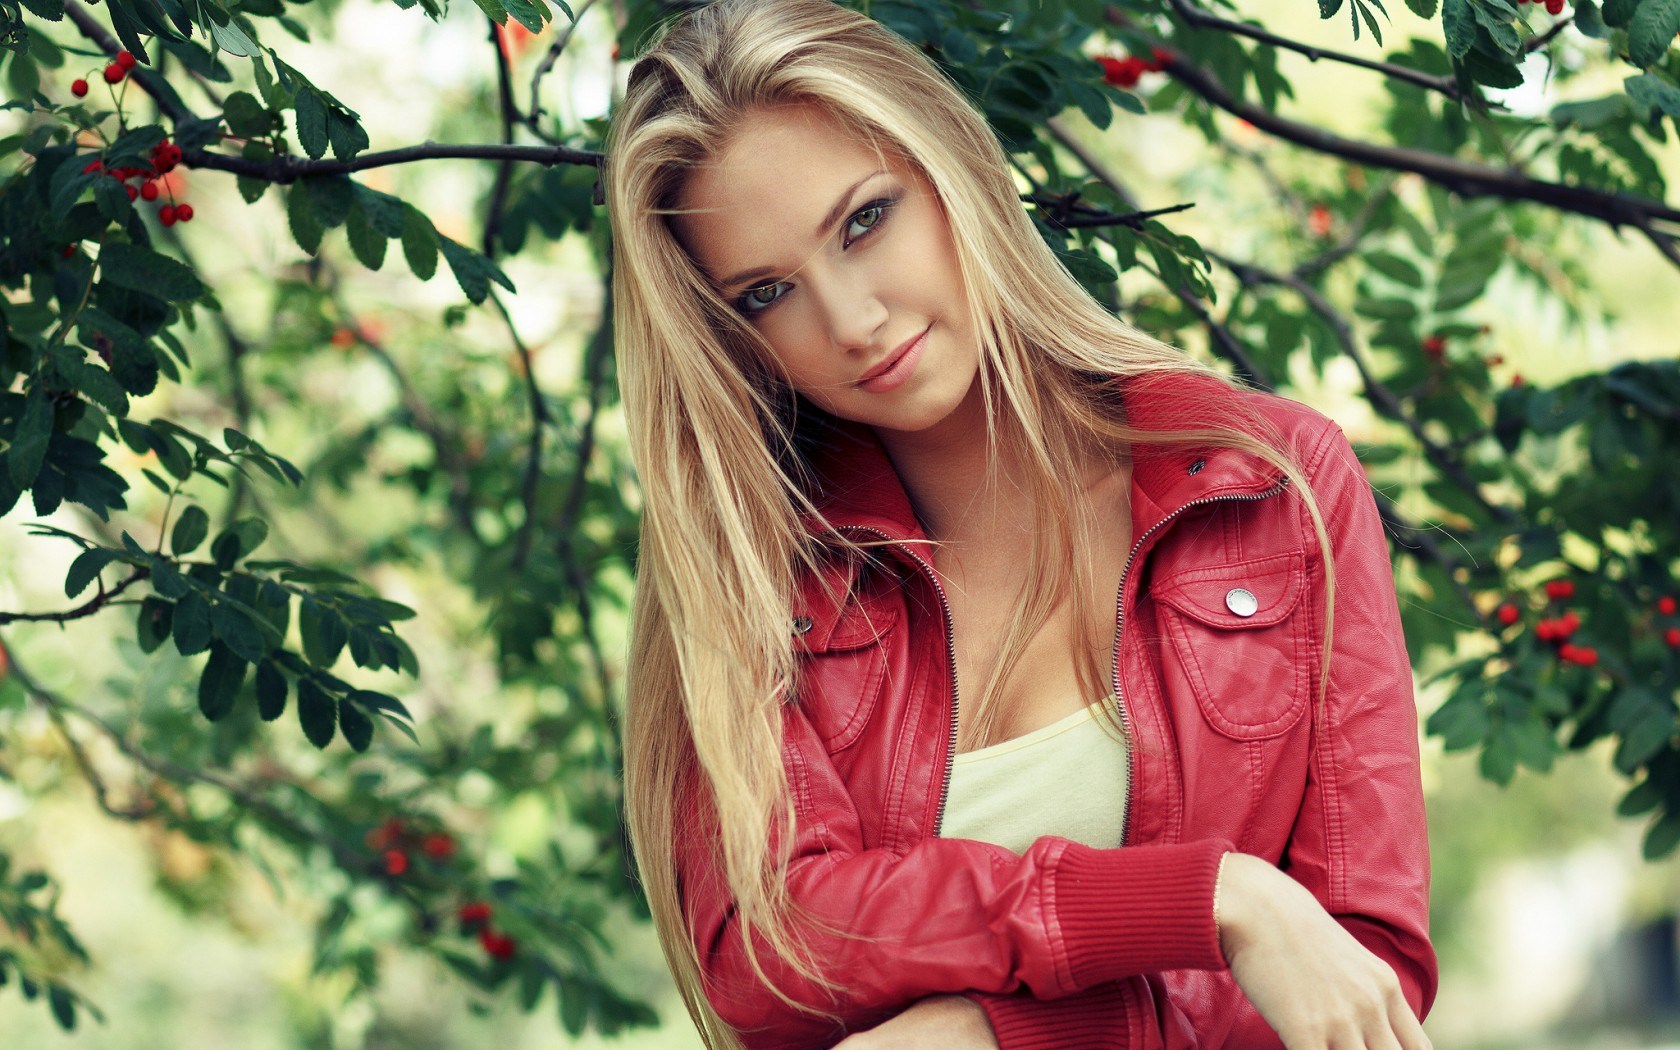 Blonde-girl-with-red-jacket-photography-wallpapers-1436032677g84nk